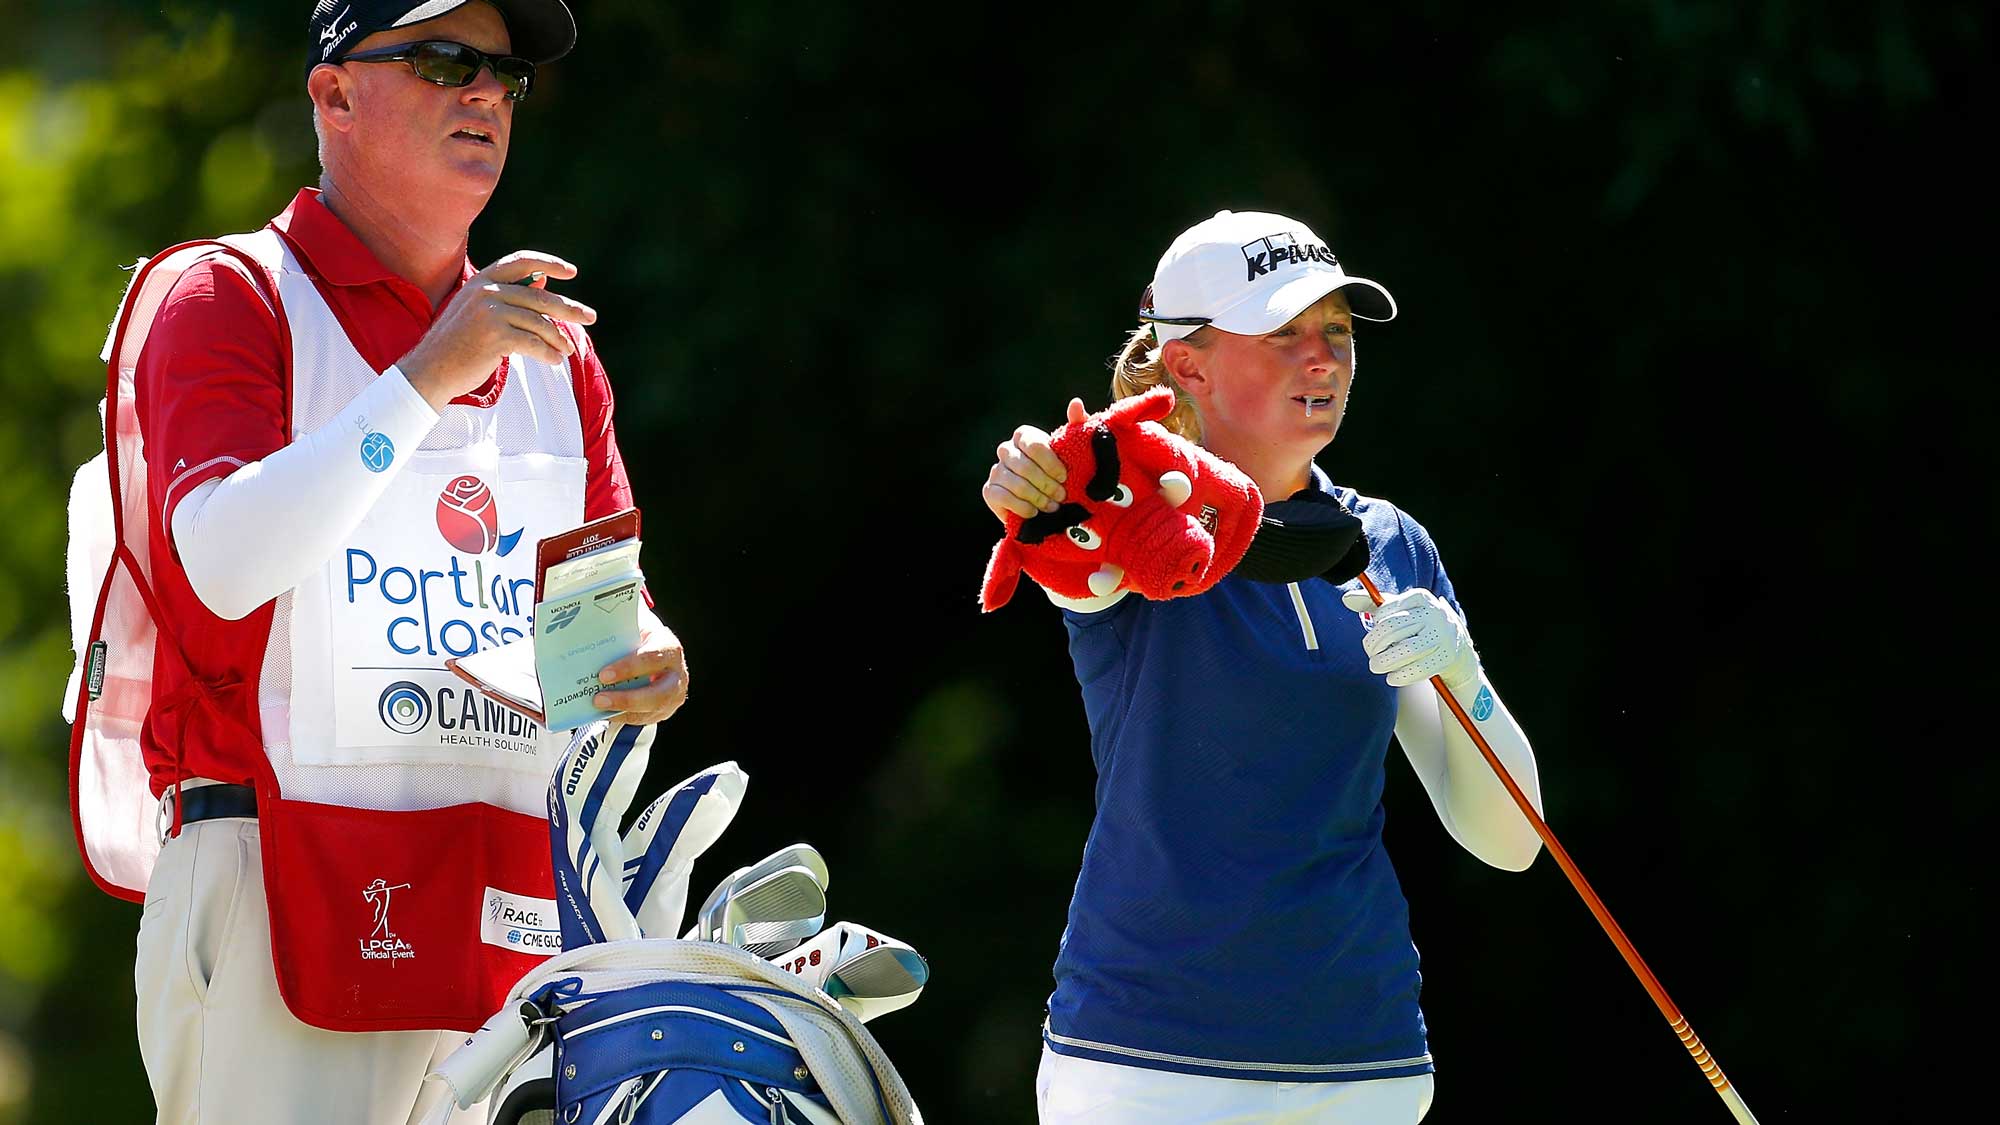 Stacy Lewis prepares to tee off on the 5th hole during the third round of the LPGA Cambia Portland Classic